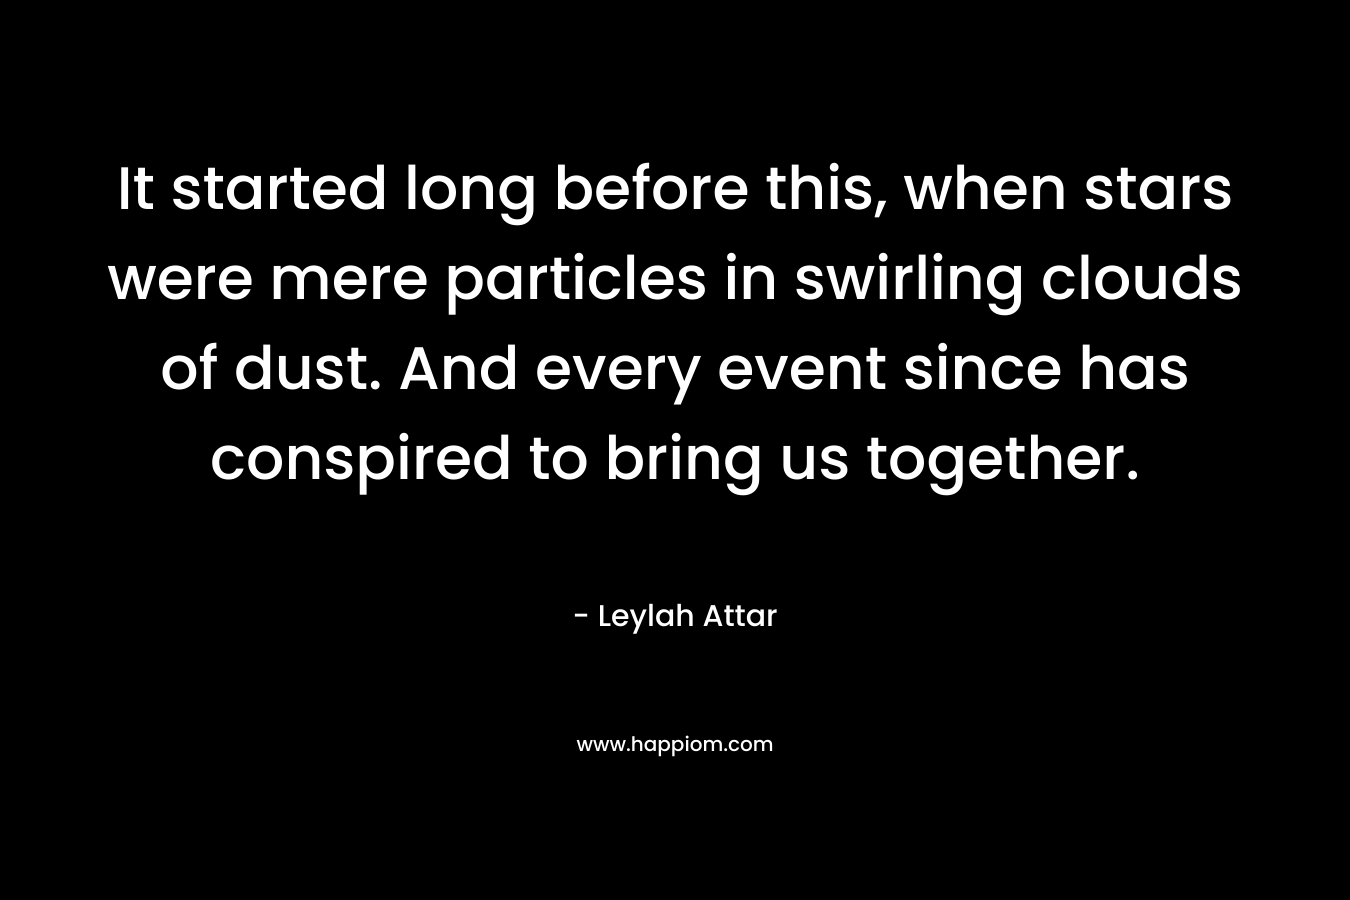 It started long before this, when stars were mere particles in swirling clouds of dust. And every event since has conspired to bring us together. – Leylah Attar